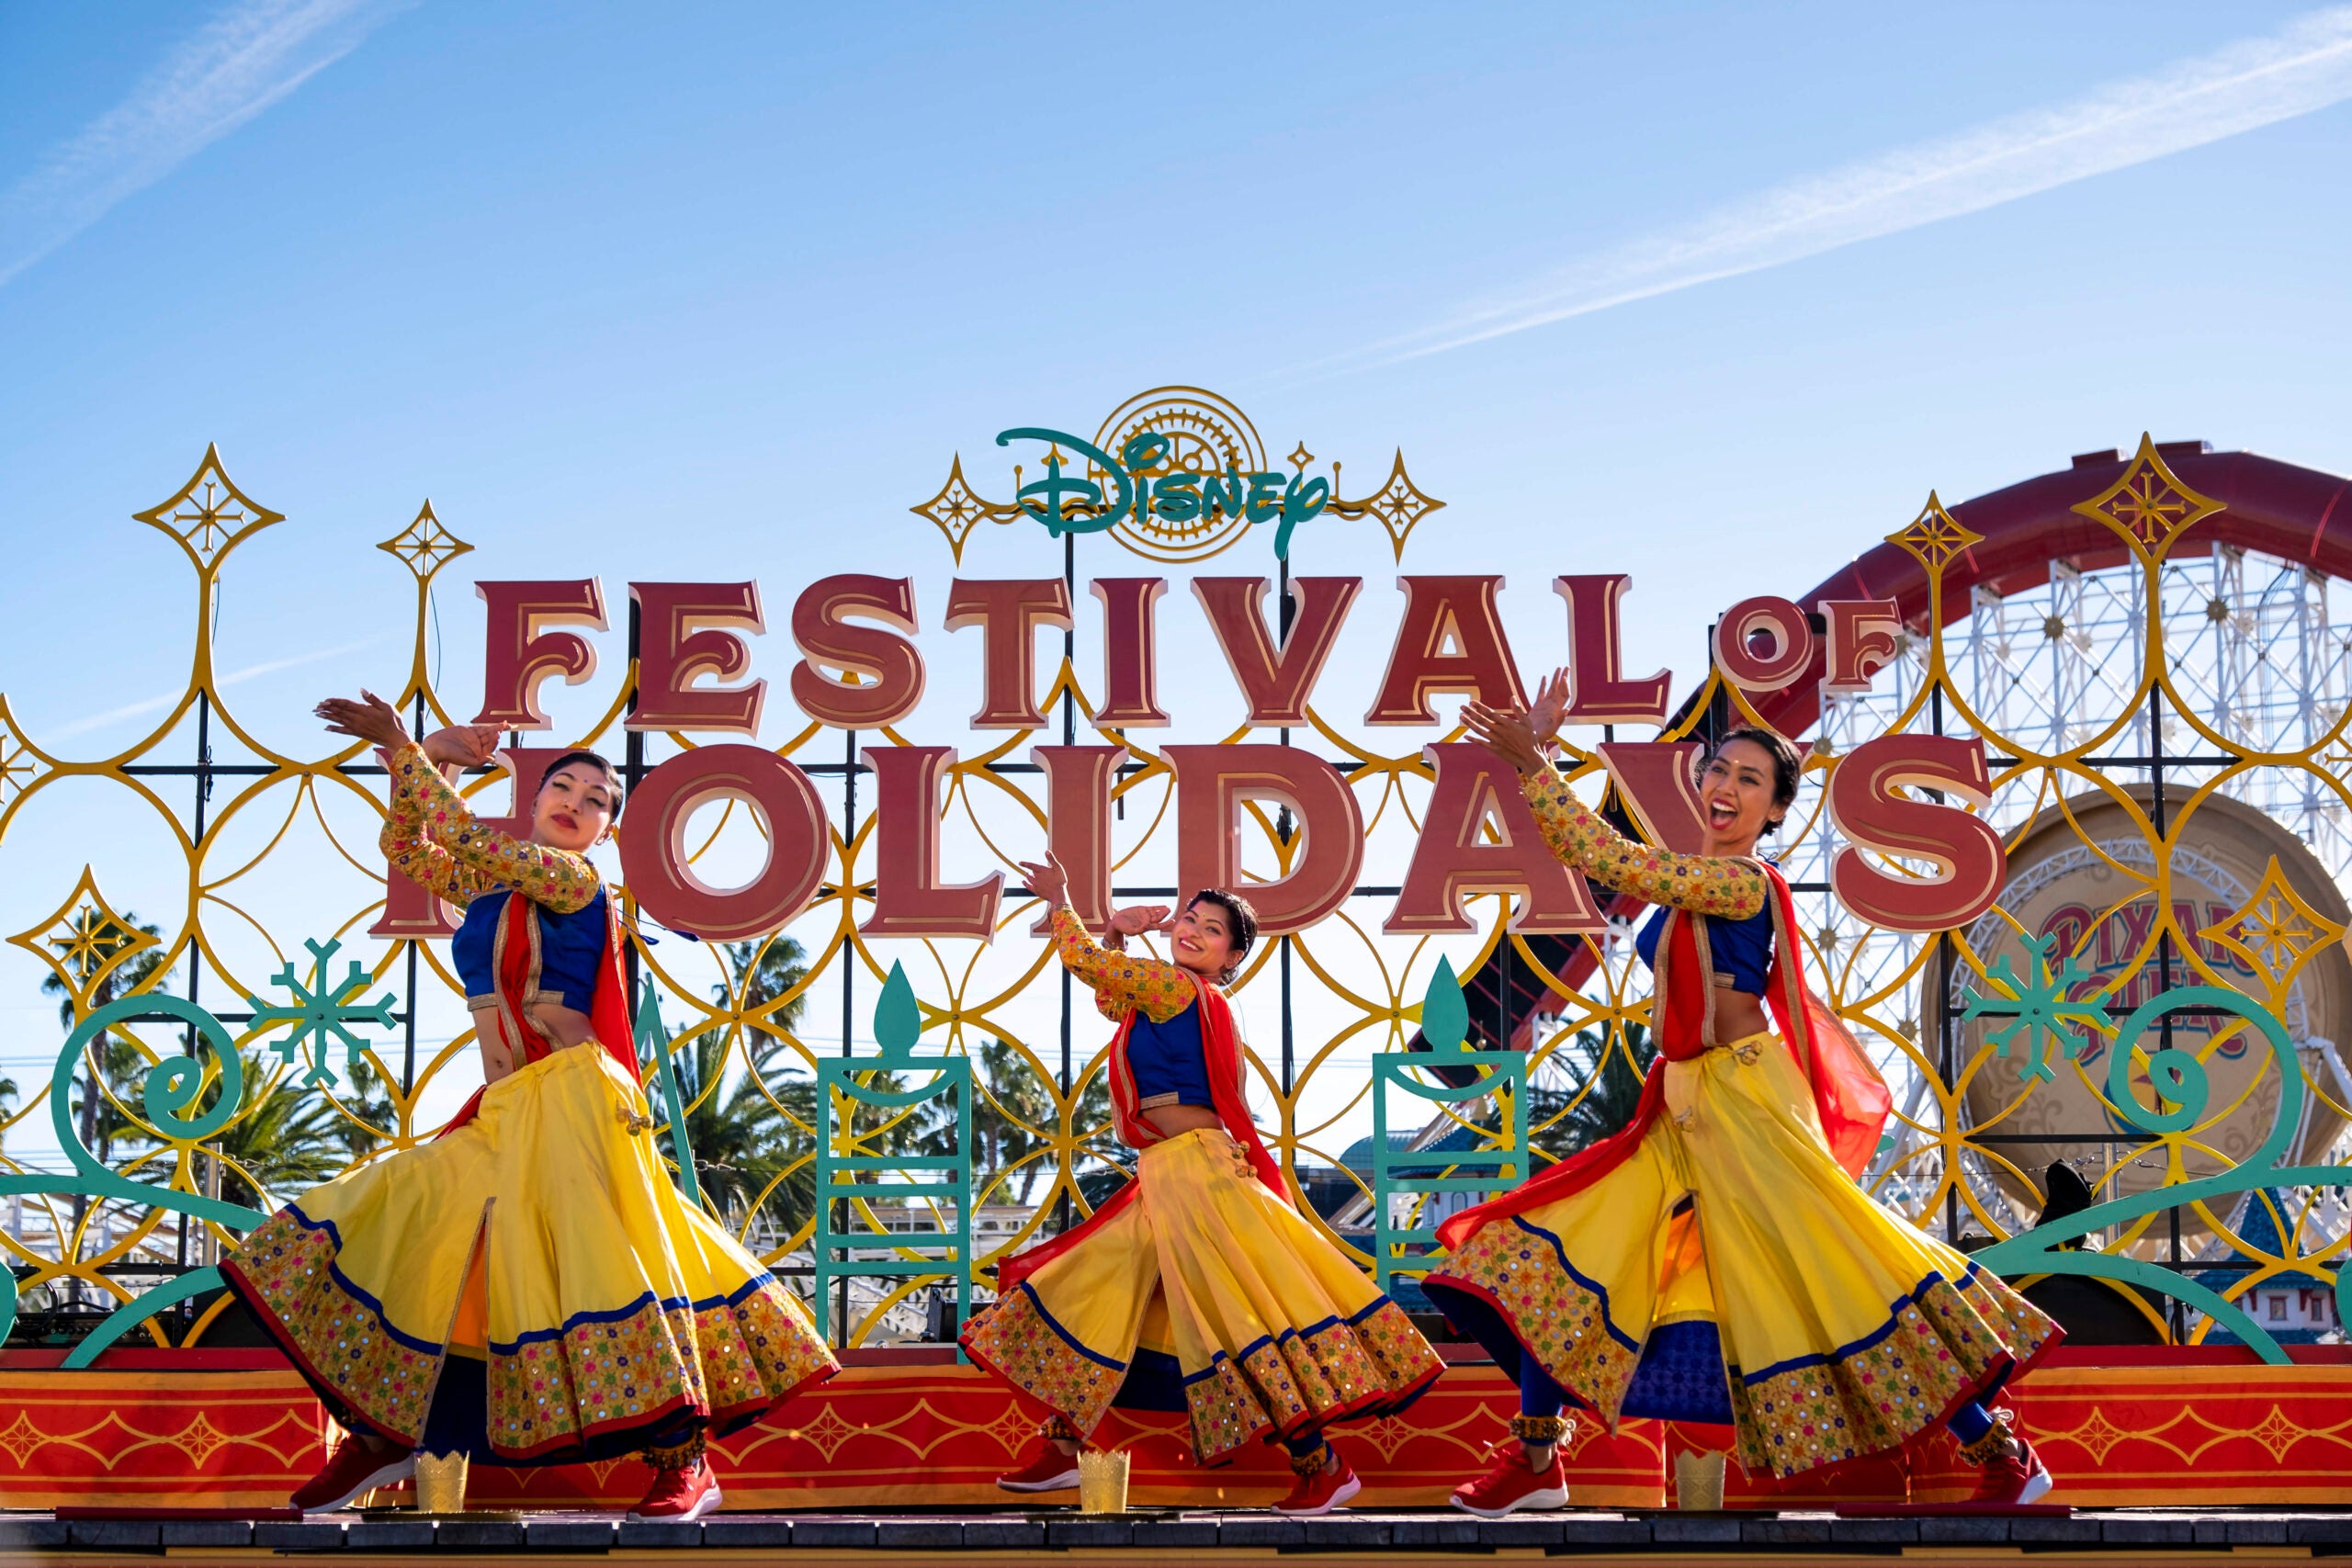 From Diwali to Hanukkah: How theme parks have fun holidays all over the world